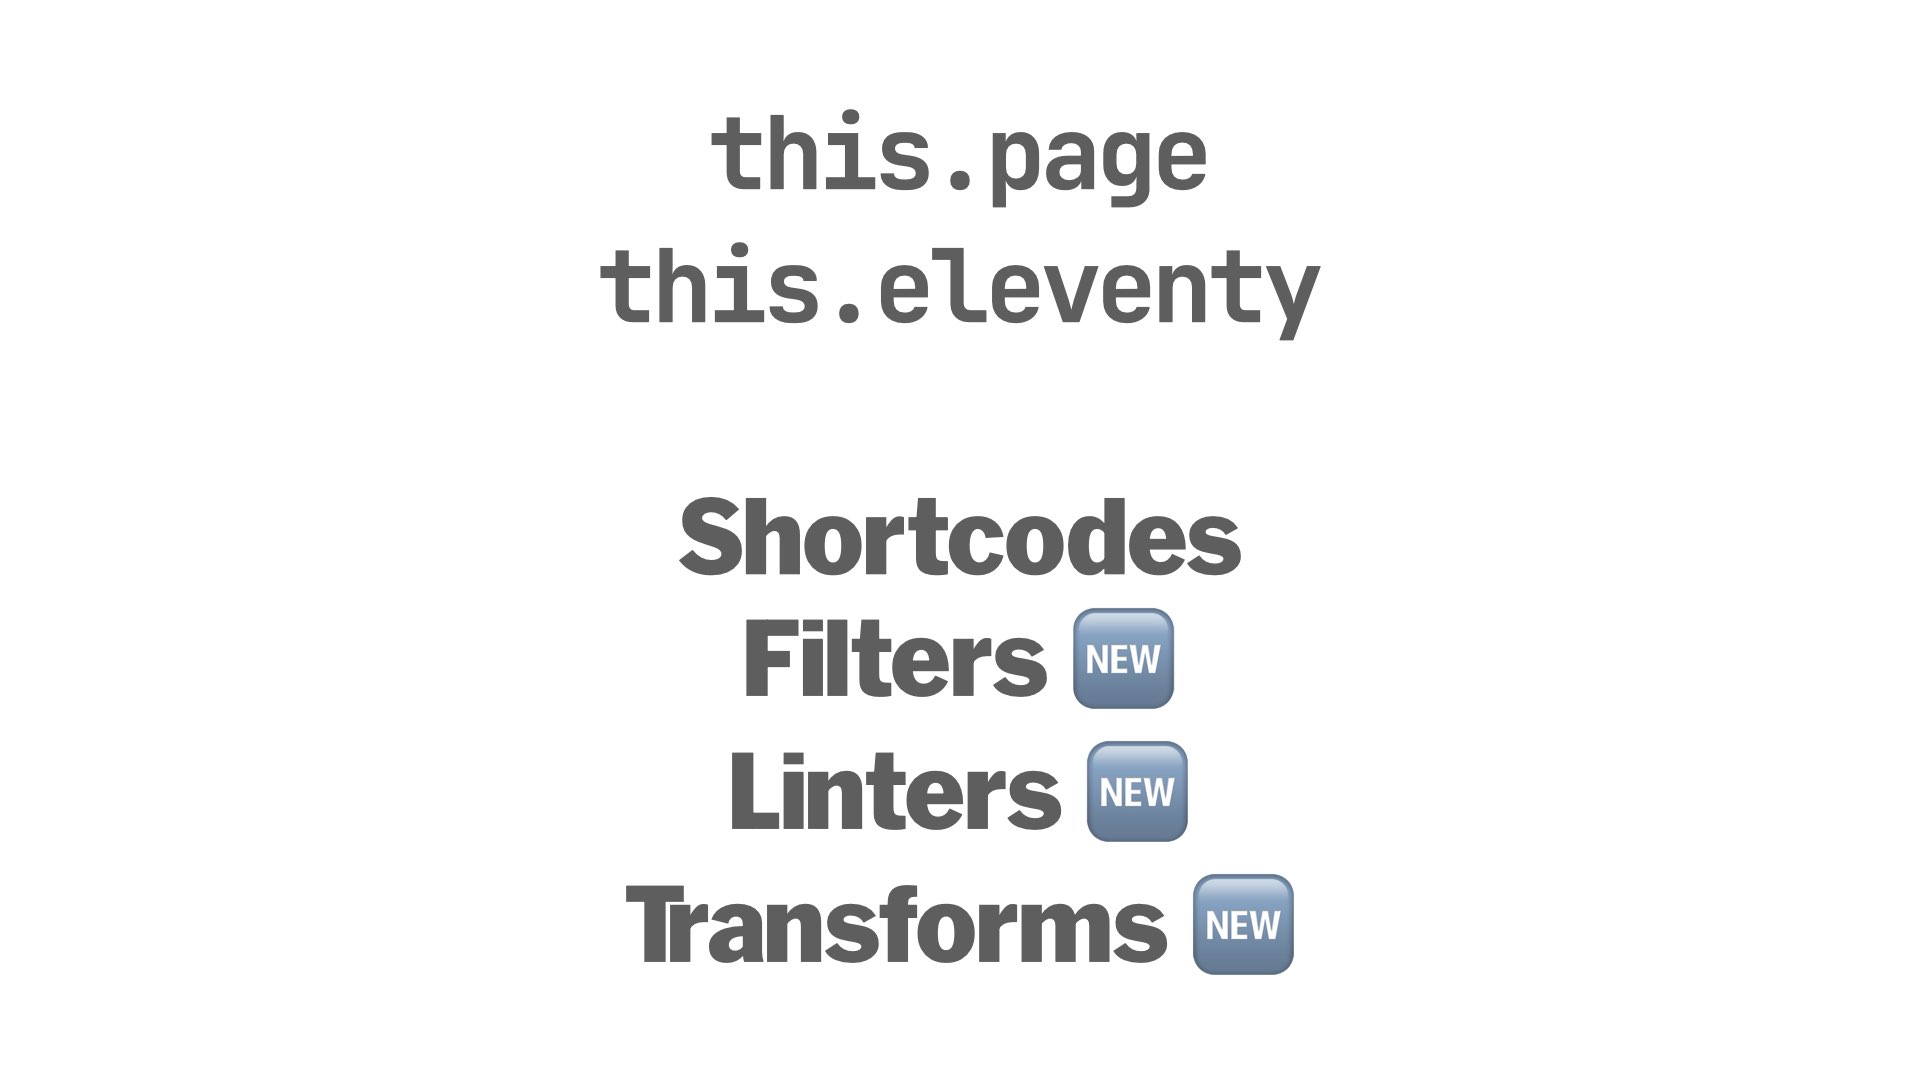 this.page and this.eleventy on Shortcodes, Filters, Linters, Transforms